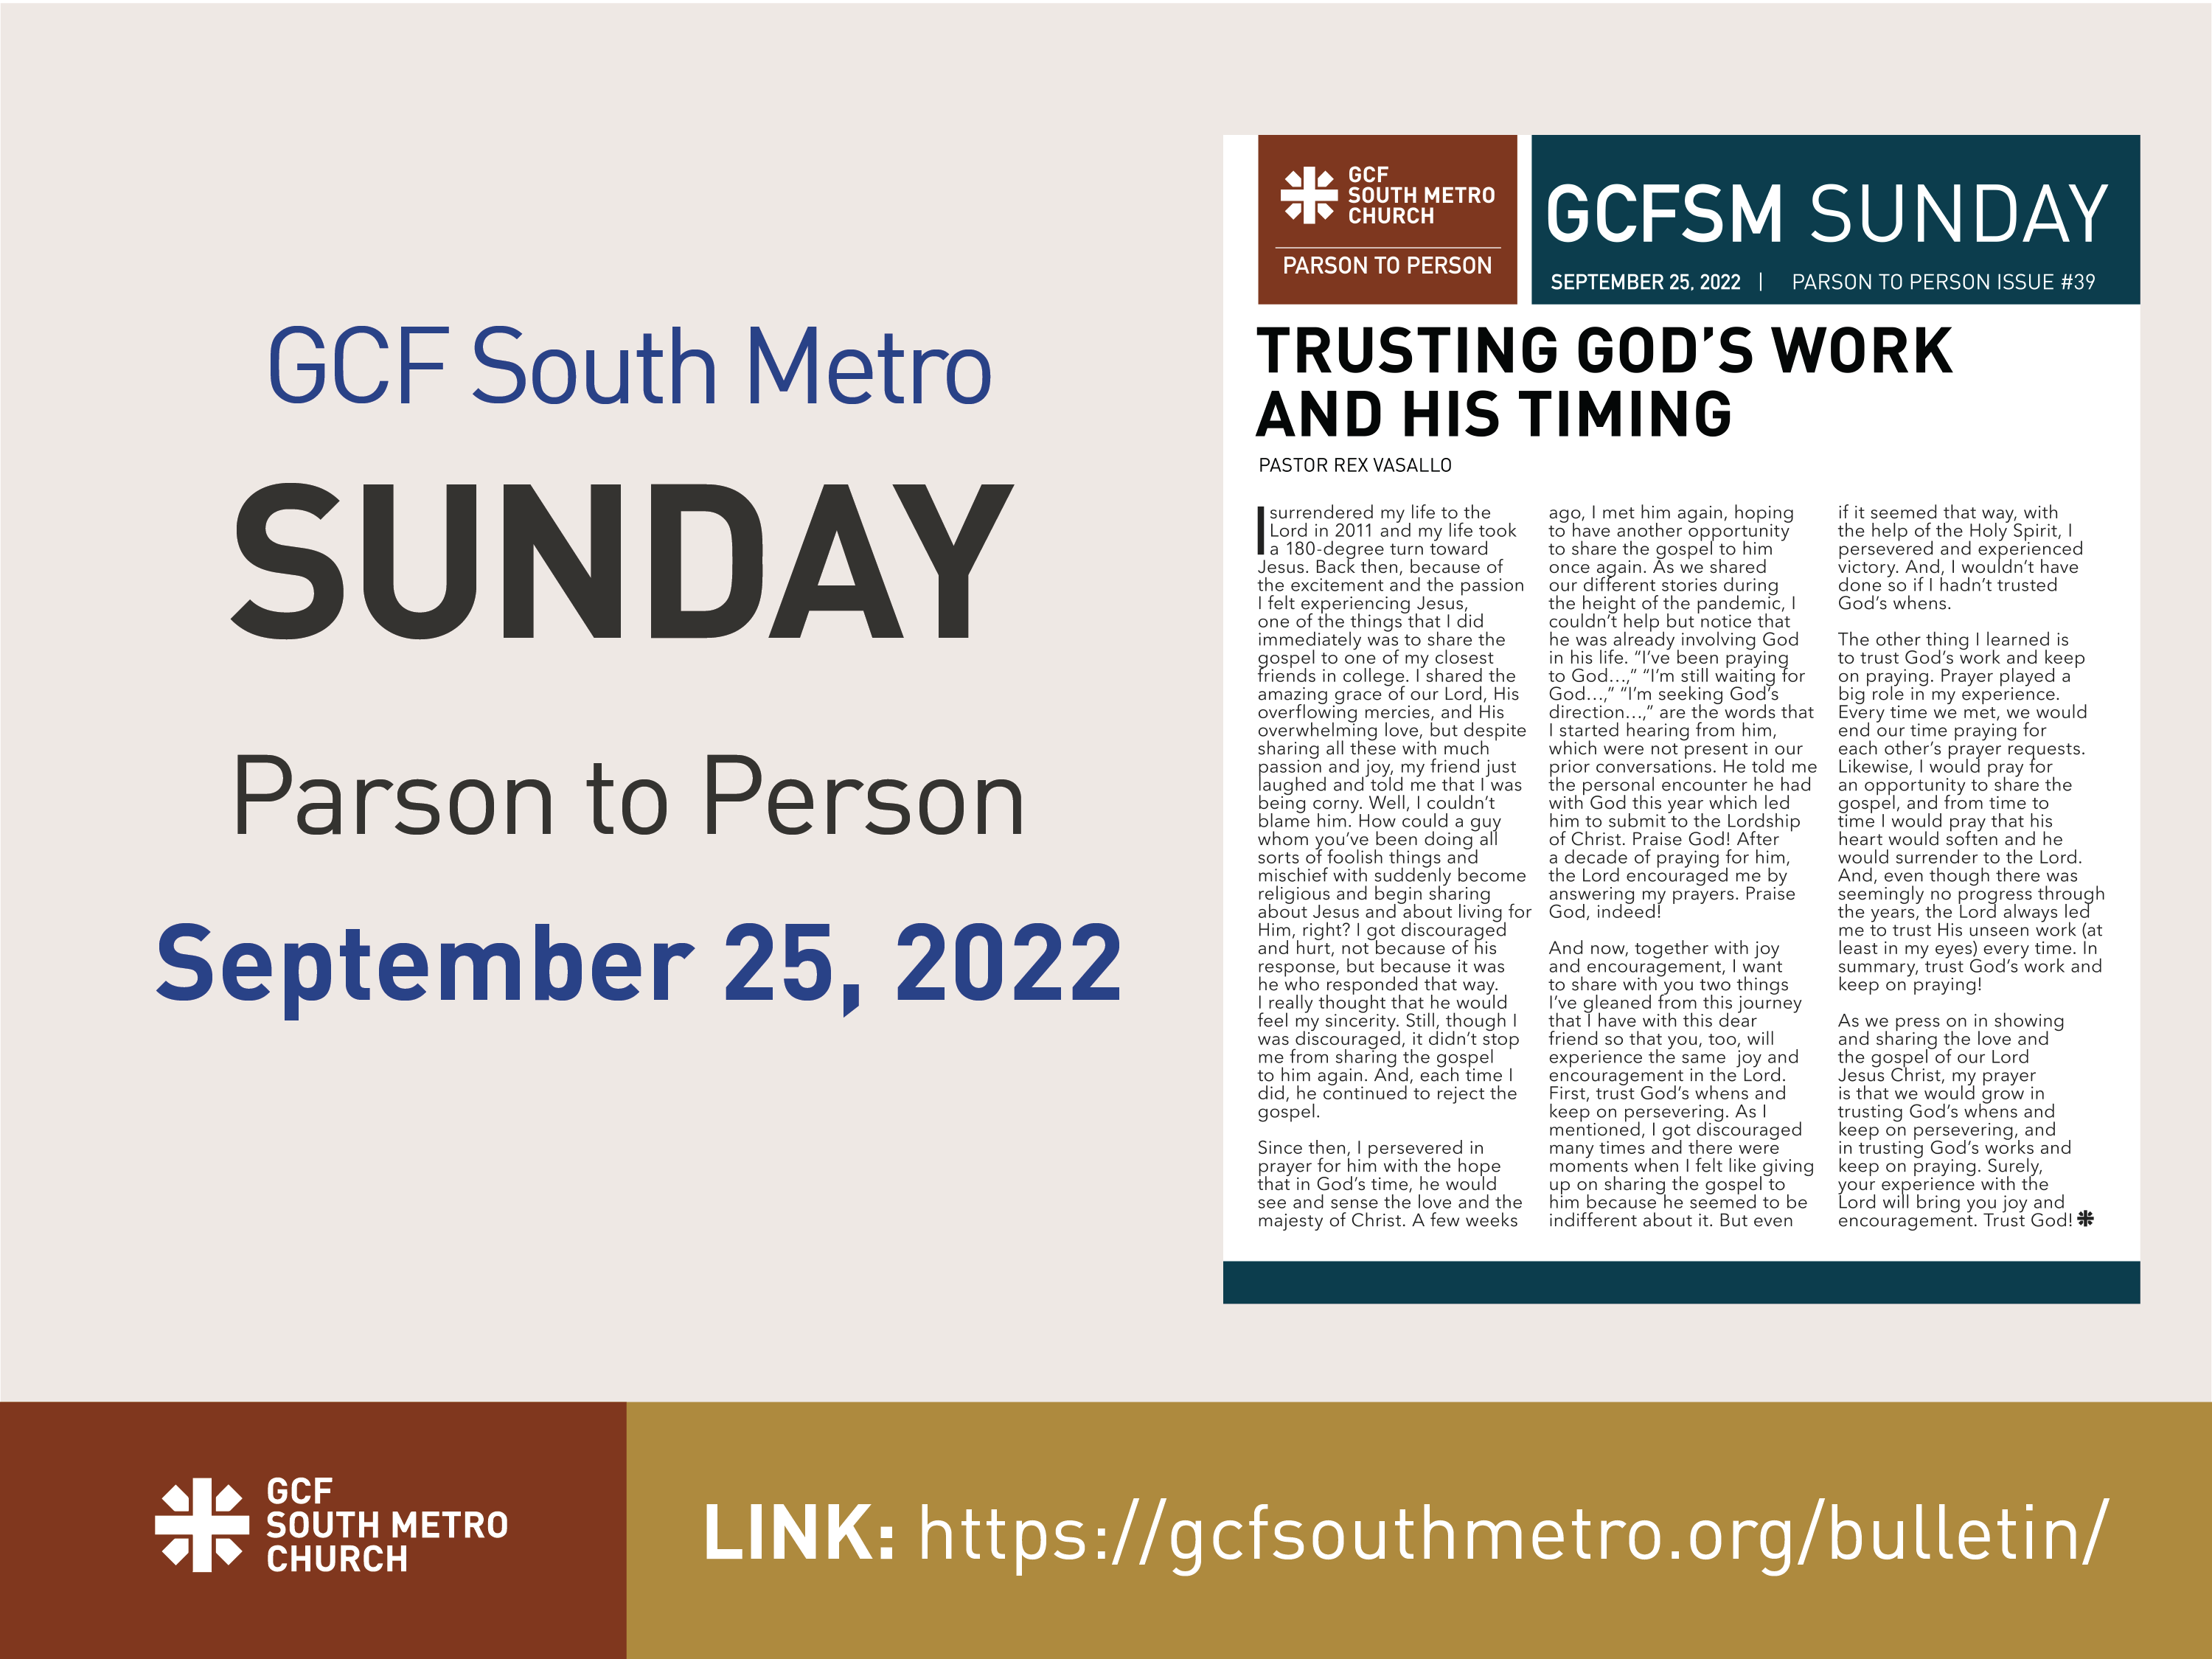 Sunday Bulletin – Parson to Person, September 25, 2022